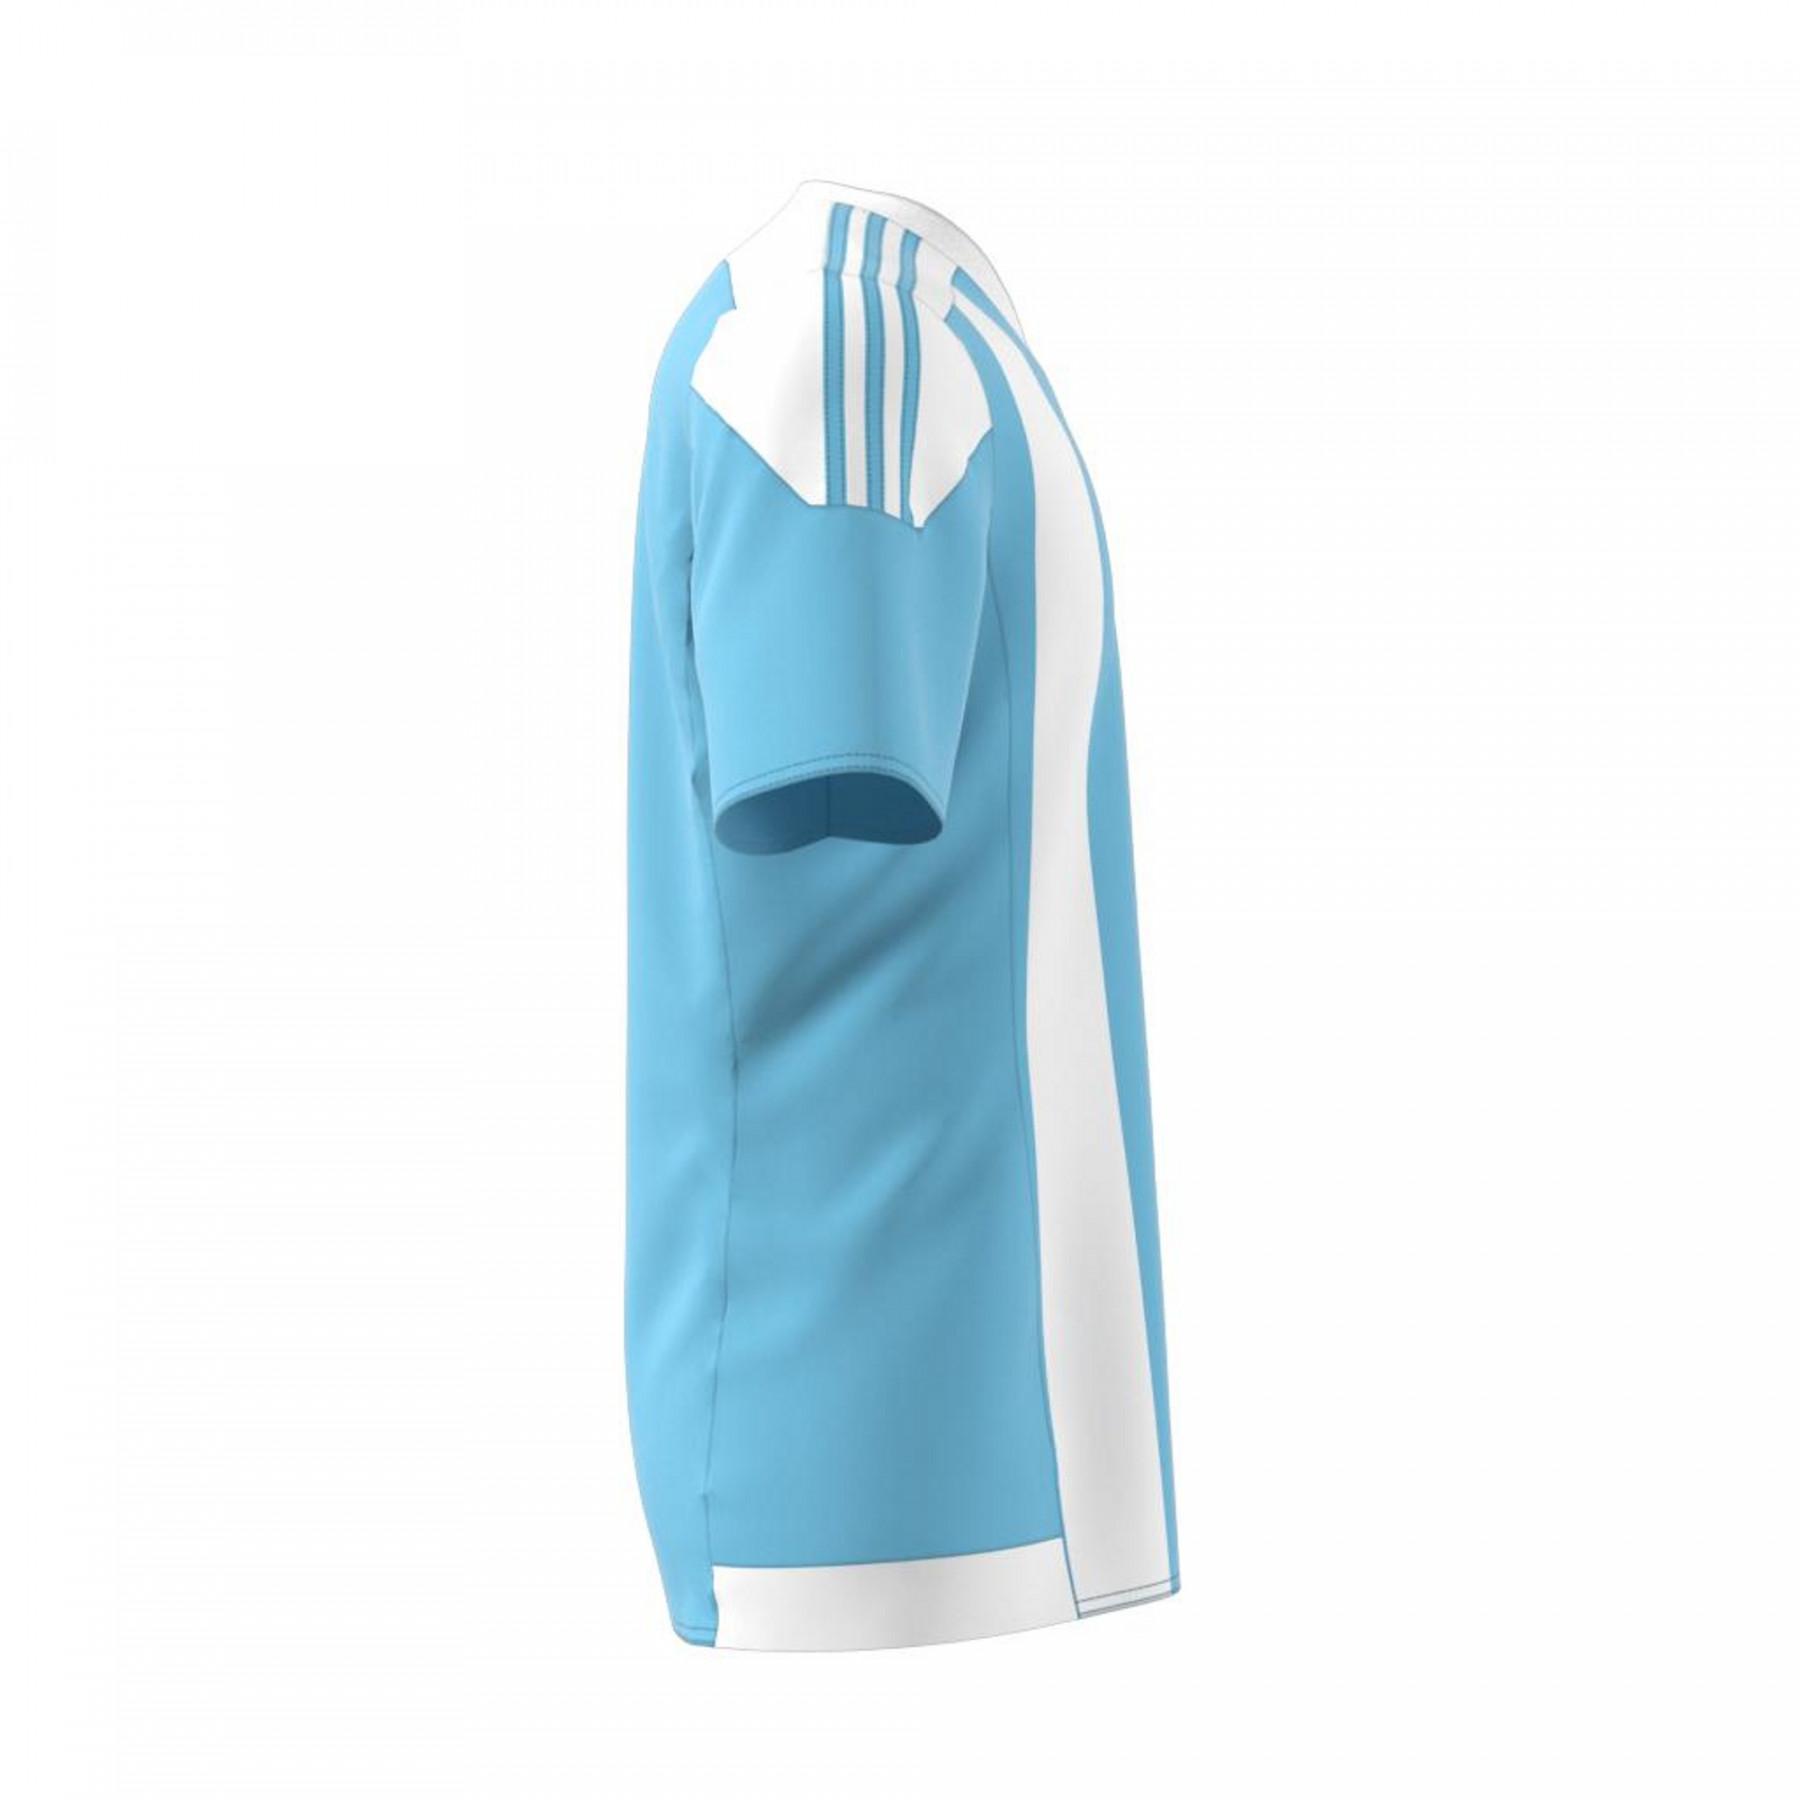 Maillot adidas Striped 15